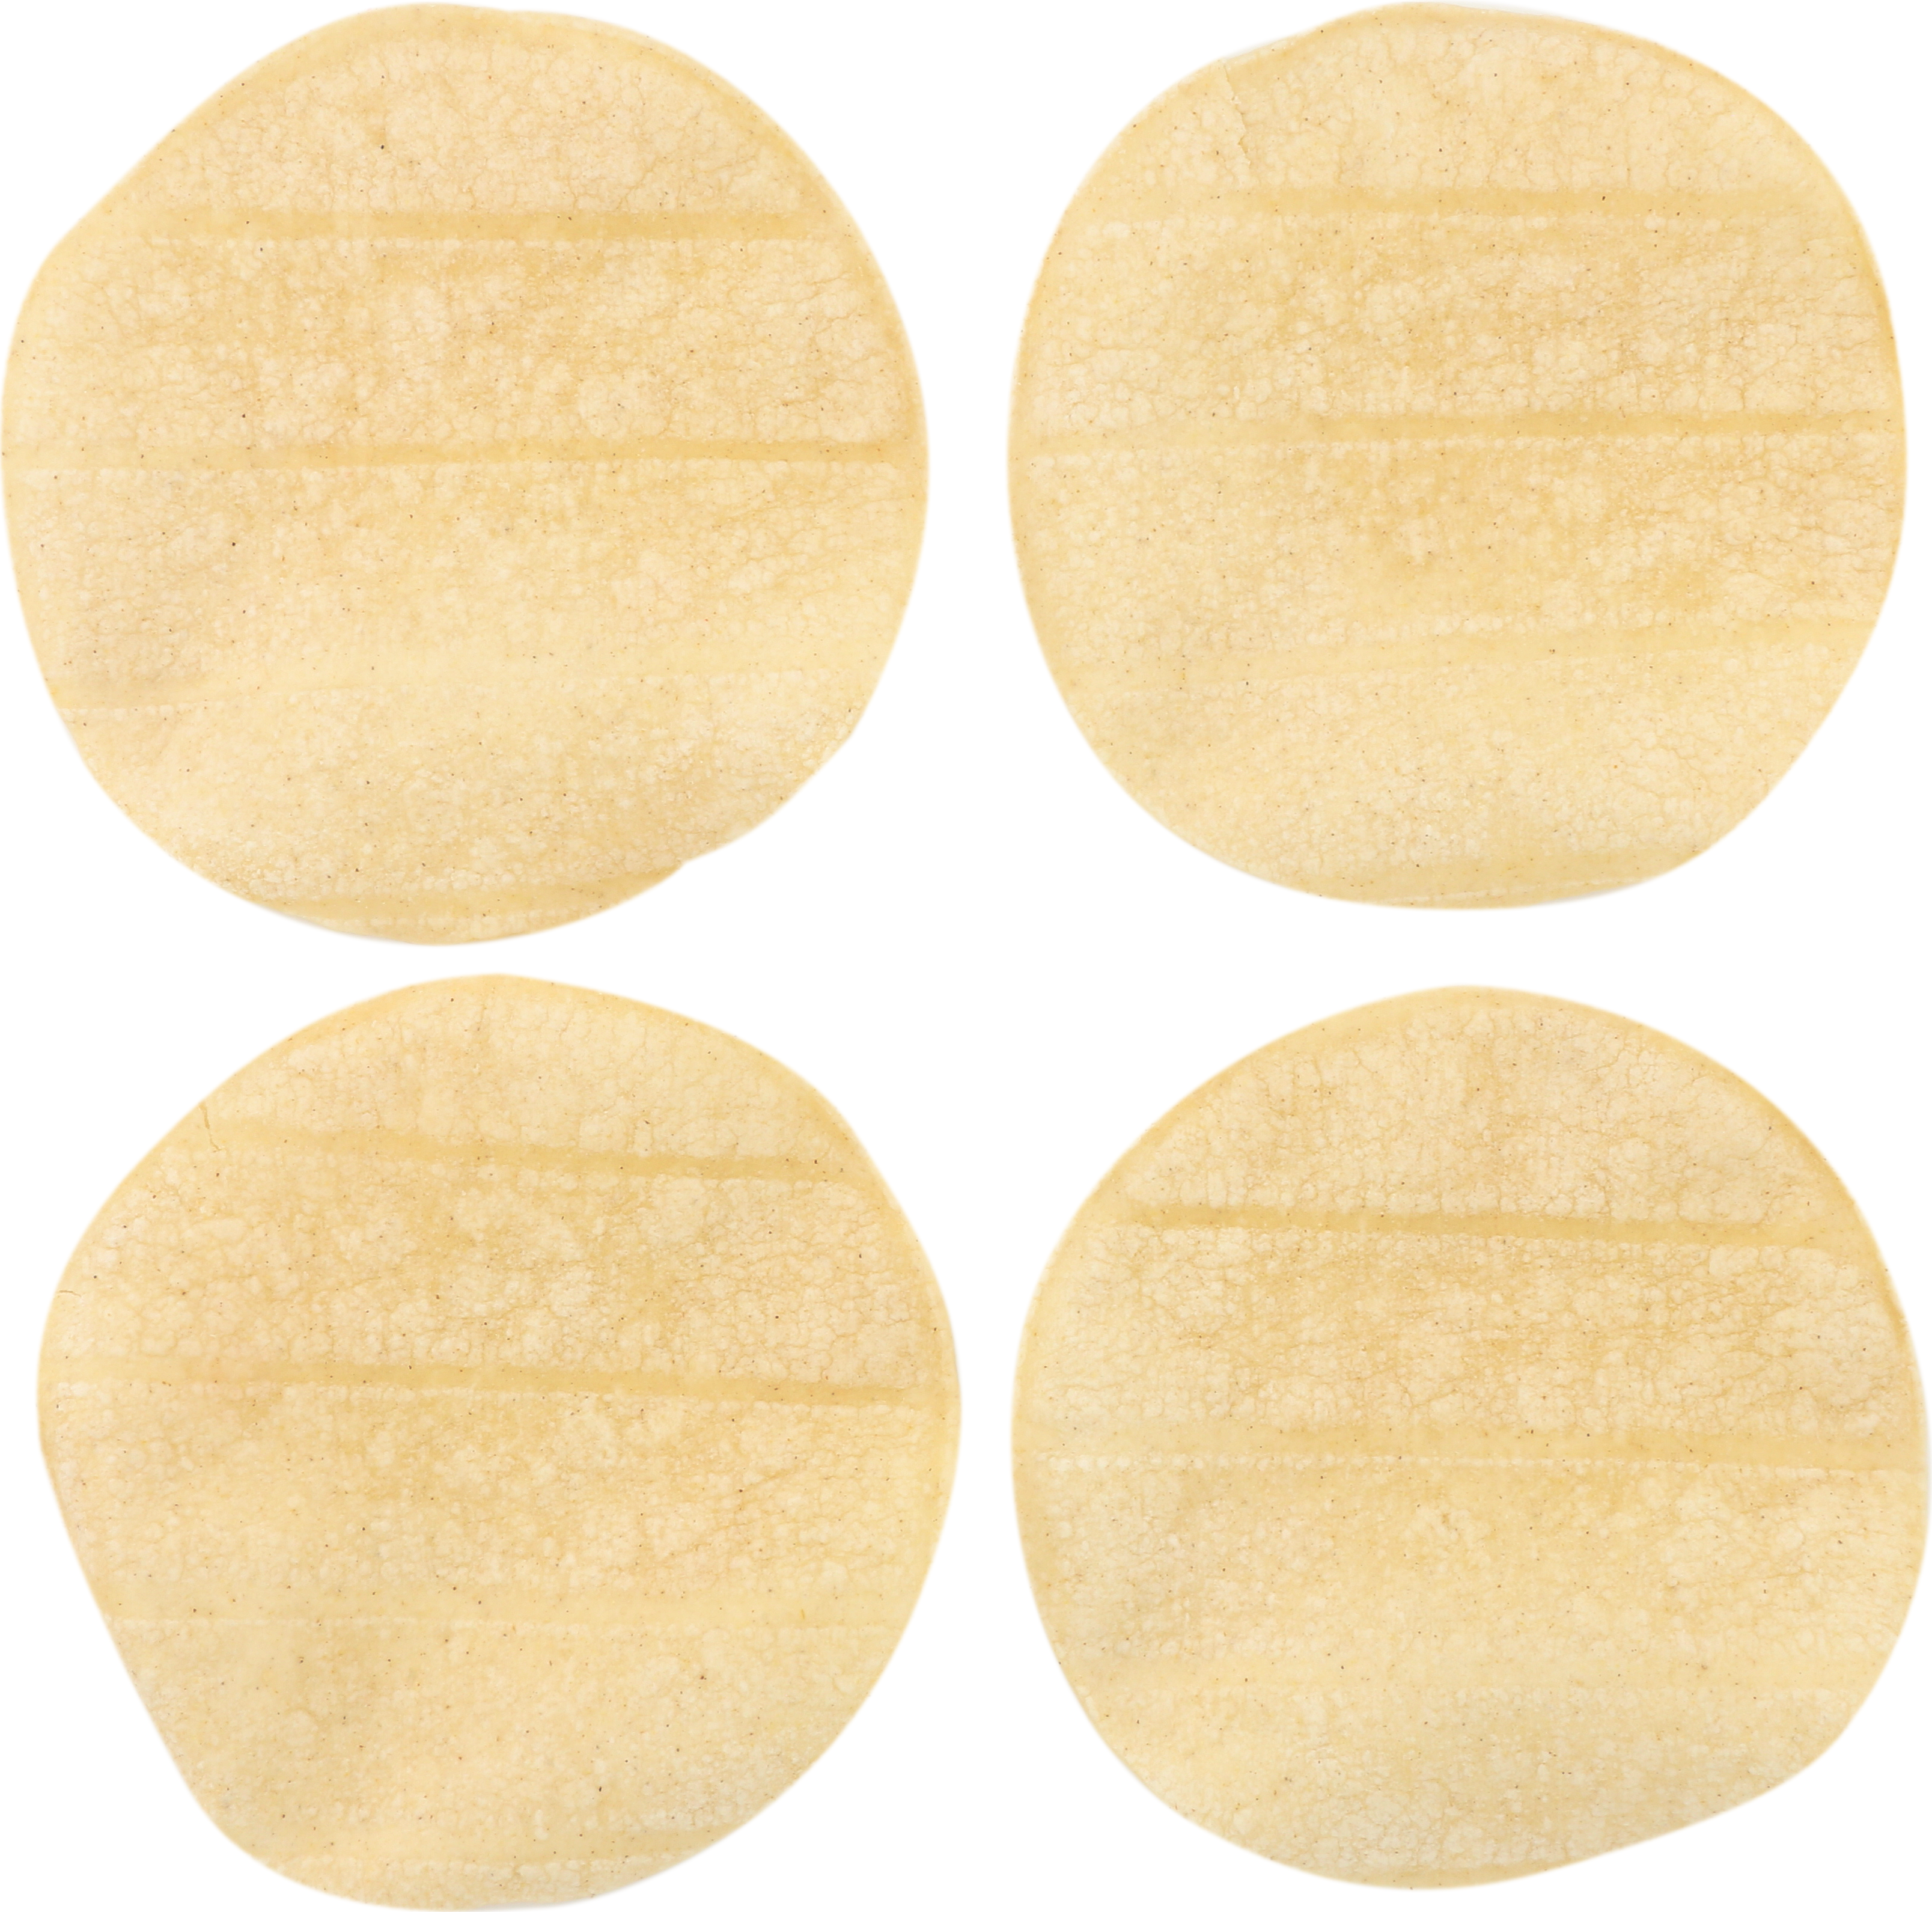 Mexican Original® 6 inch White Corn Tortillas-Thick, 4/72 count, 16.5 Lbs.http://images.salsify.com/image/upload/s--GhAFz8eA--/wnio5jer8piruinhy4wl.webp